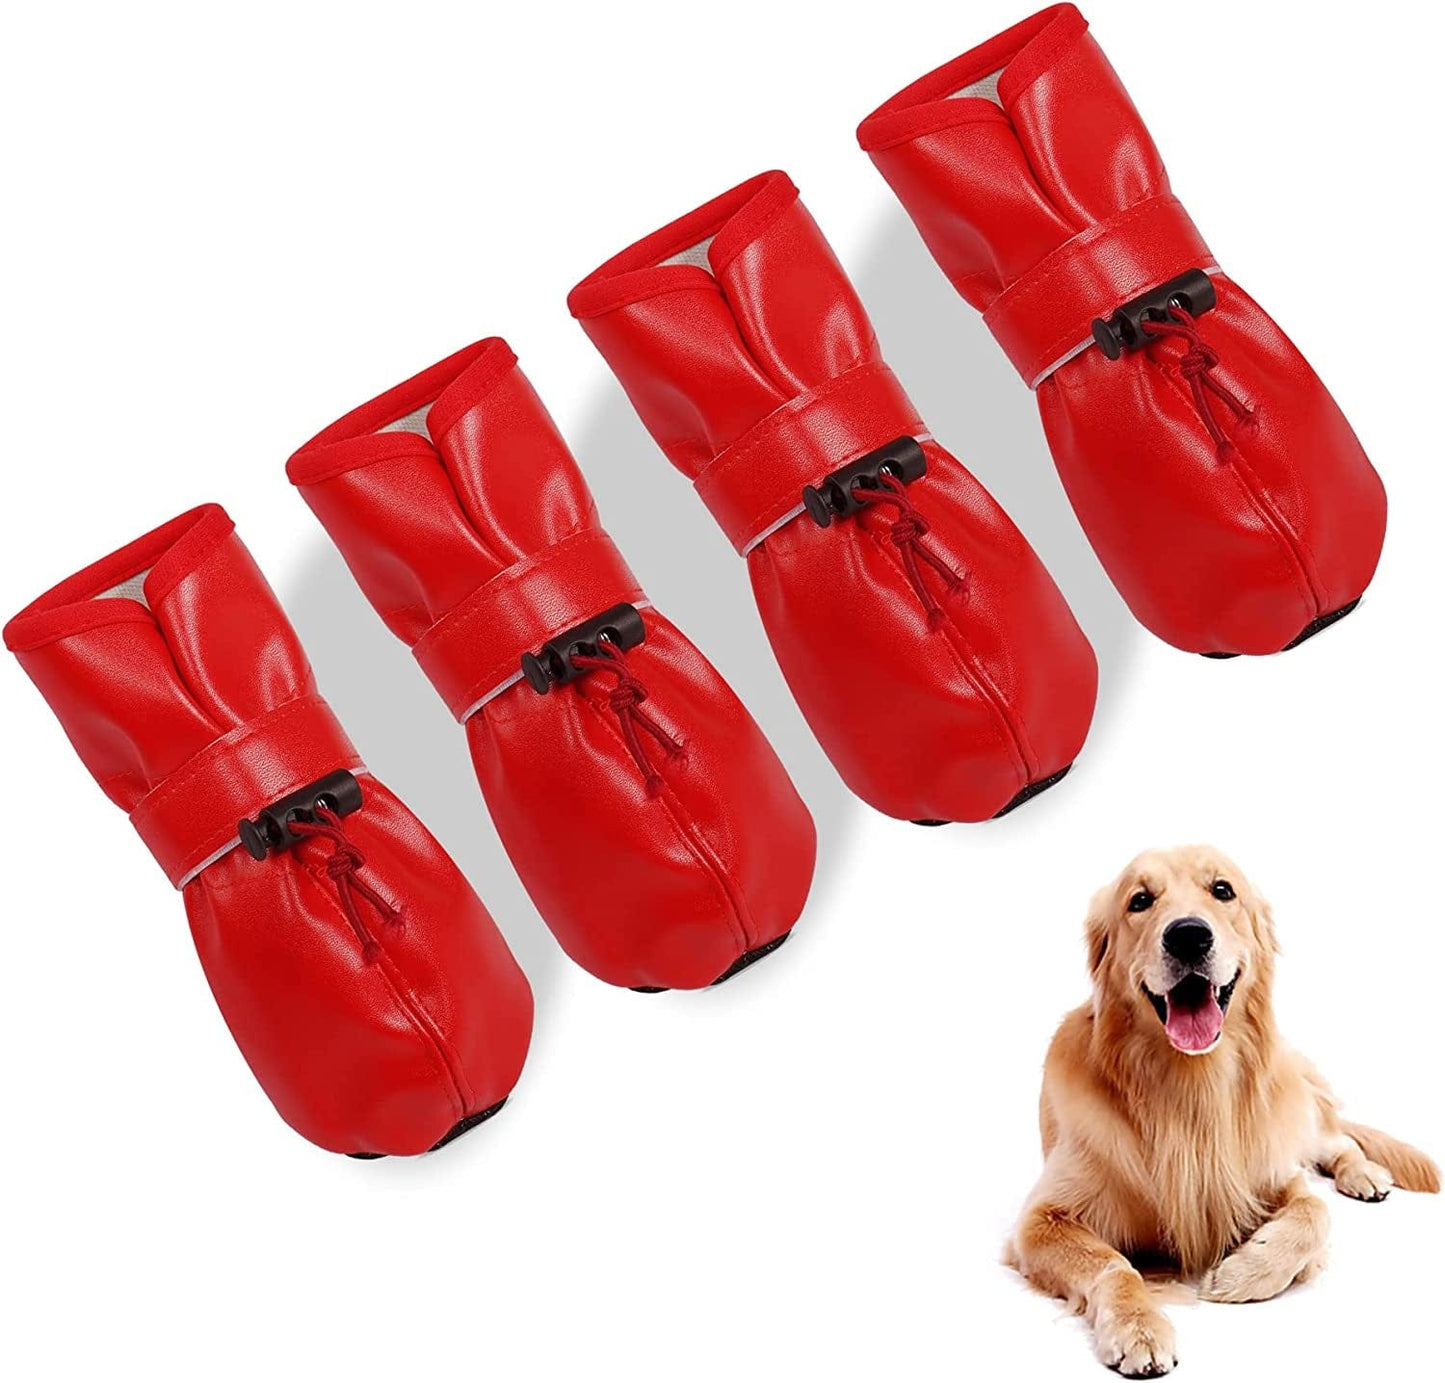 YAODHAOD Dog Shoes for Large Dogs, Dog Boots Paw Protectors for Hot Pavement, Leather Anti-Slip Adjustable Booties,For Indoor Hardwood Floor Traction Control & Outdoor Wlaking Hikin (Size 8, Black) Animals & Pet Supplies > Pet Supplies > Dog Supplies > Dog Apparel YAODHAOD Red Size 9: 3.5"x2.7"(L*W) 